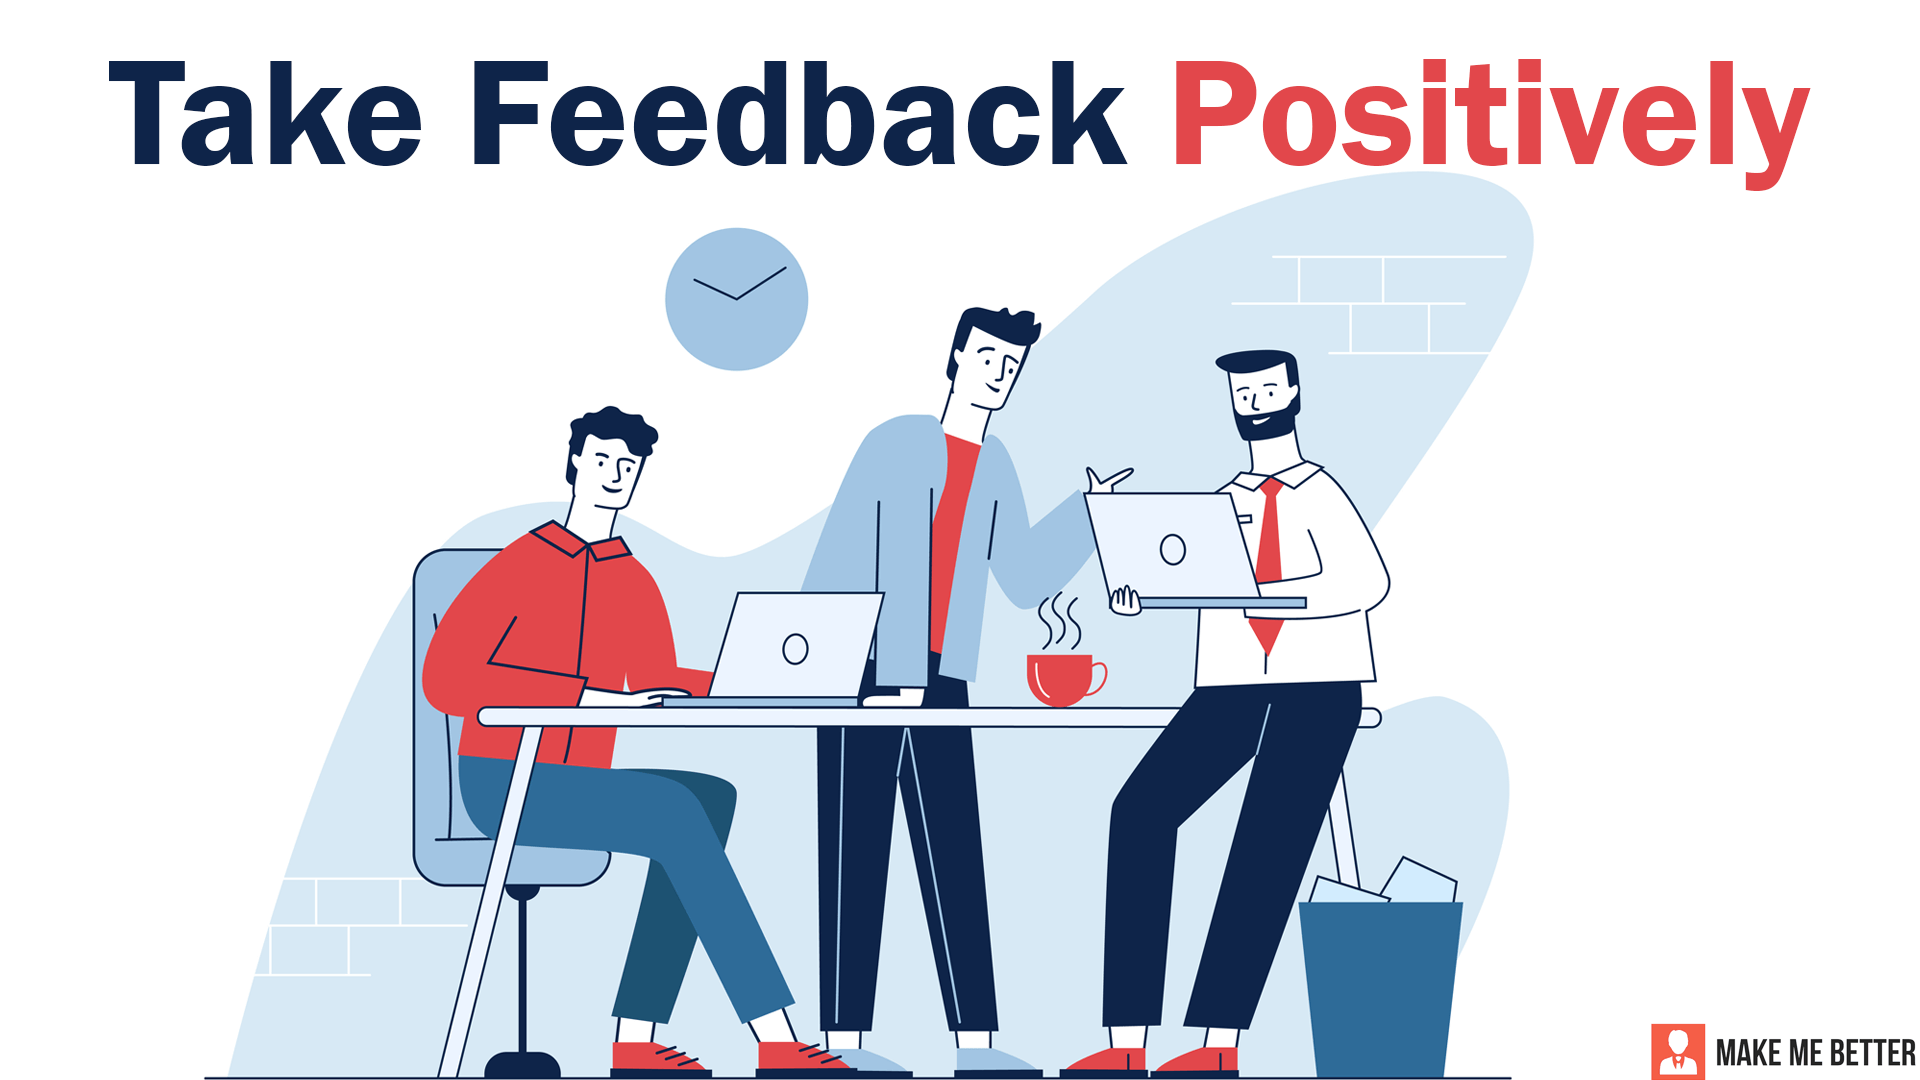 Feedback at work Positively